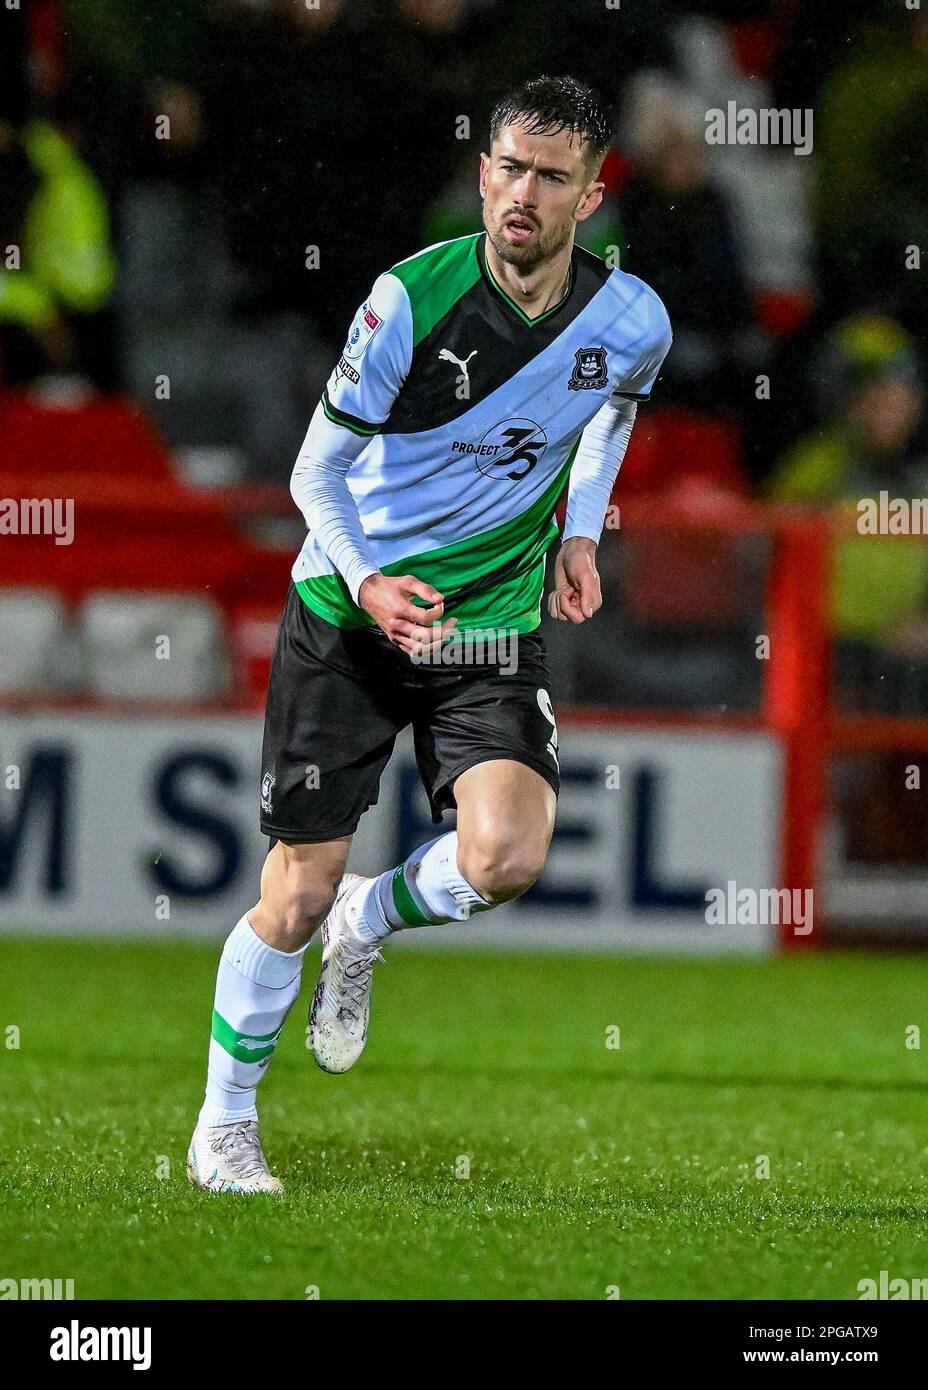 Ryan Hardie #9 of Plymouth Argyle  during the Sky Bet League 1 match Accrington Stanley vs Plymouth Argyle at Wham Stadium, Accrington, United Kingdom, 21st March 2023  (Photo by Stan Kasala/News Images) Stock Photo